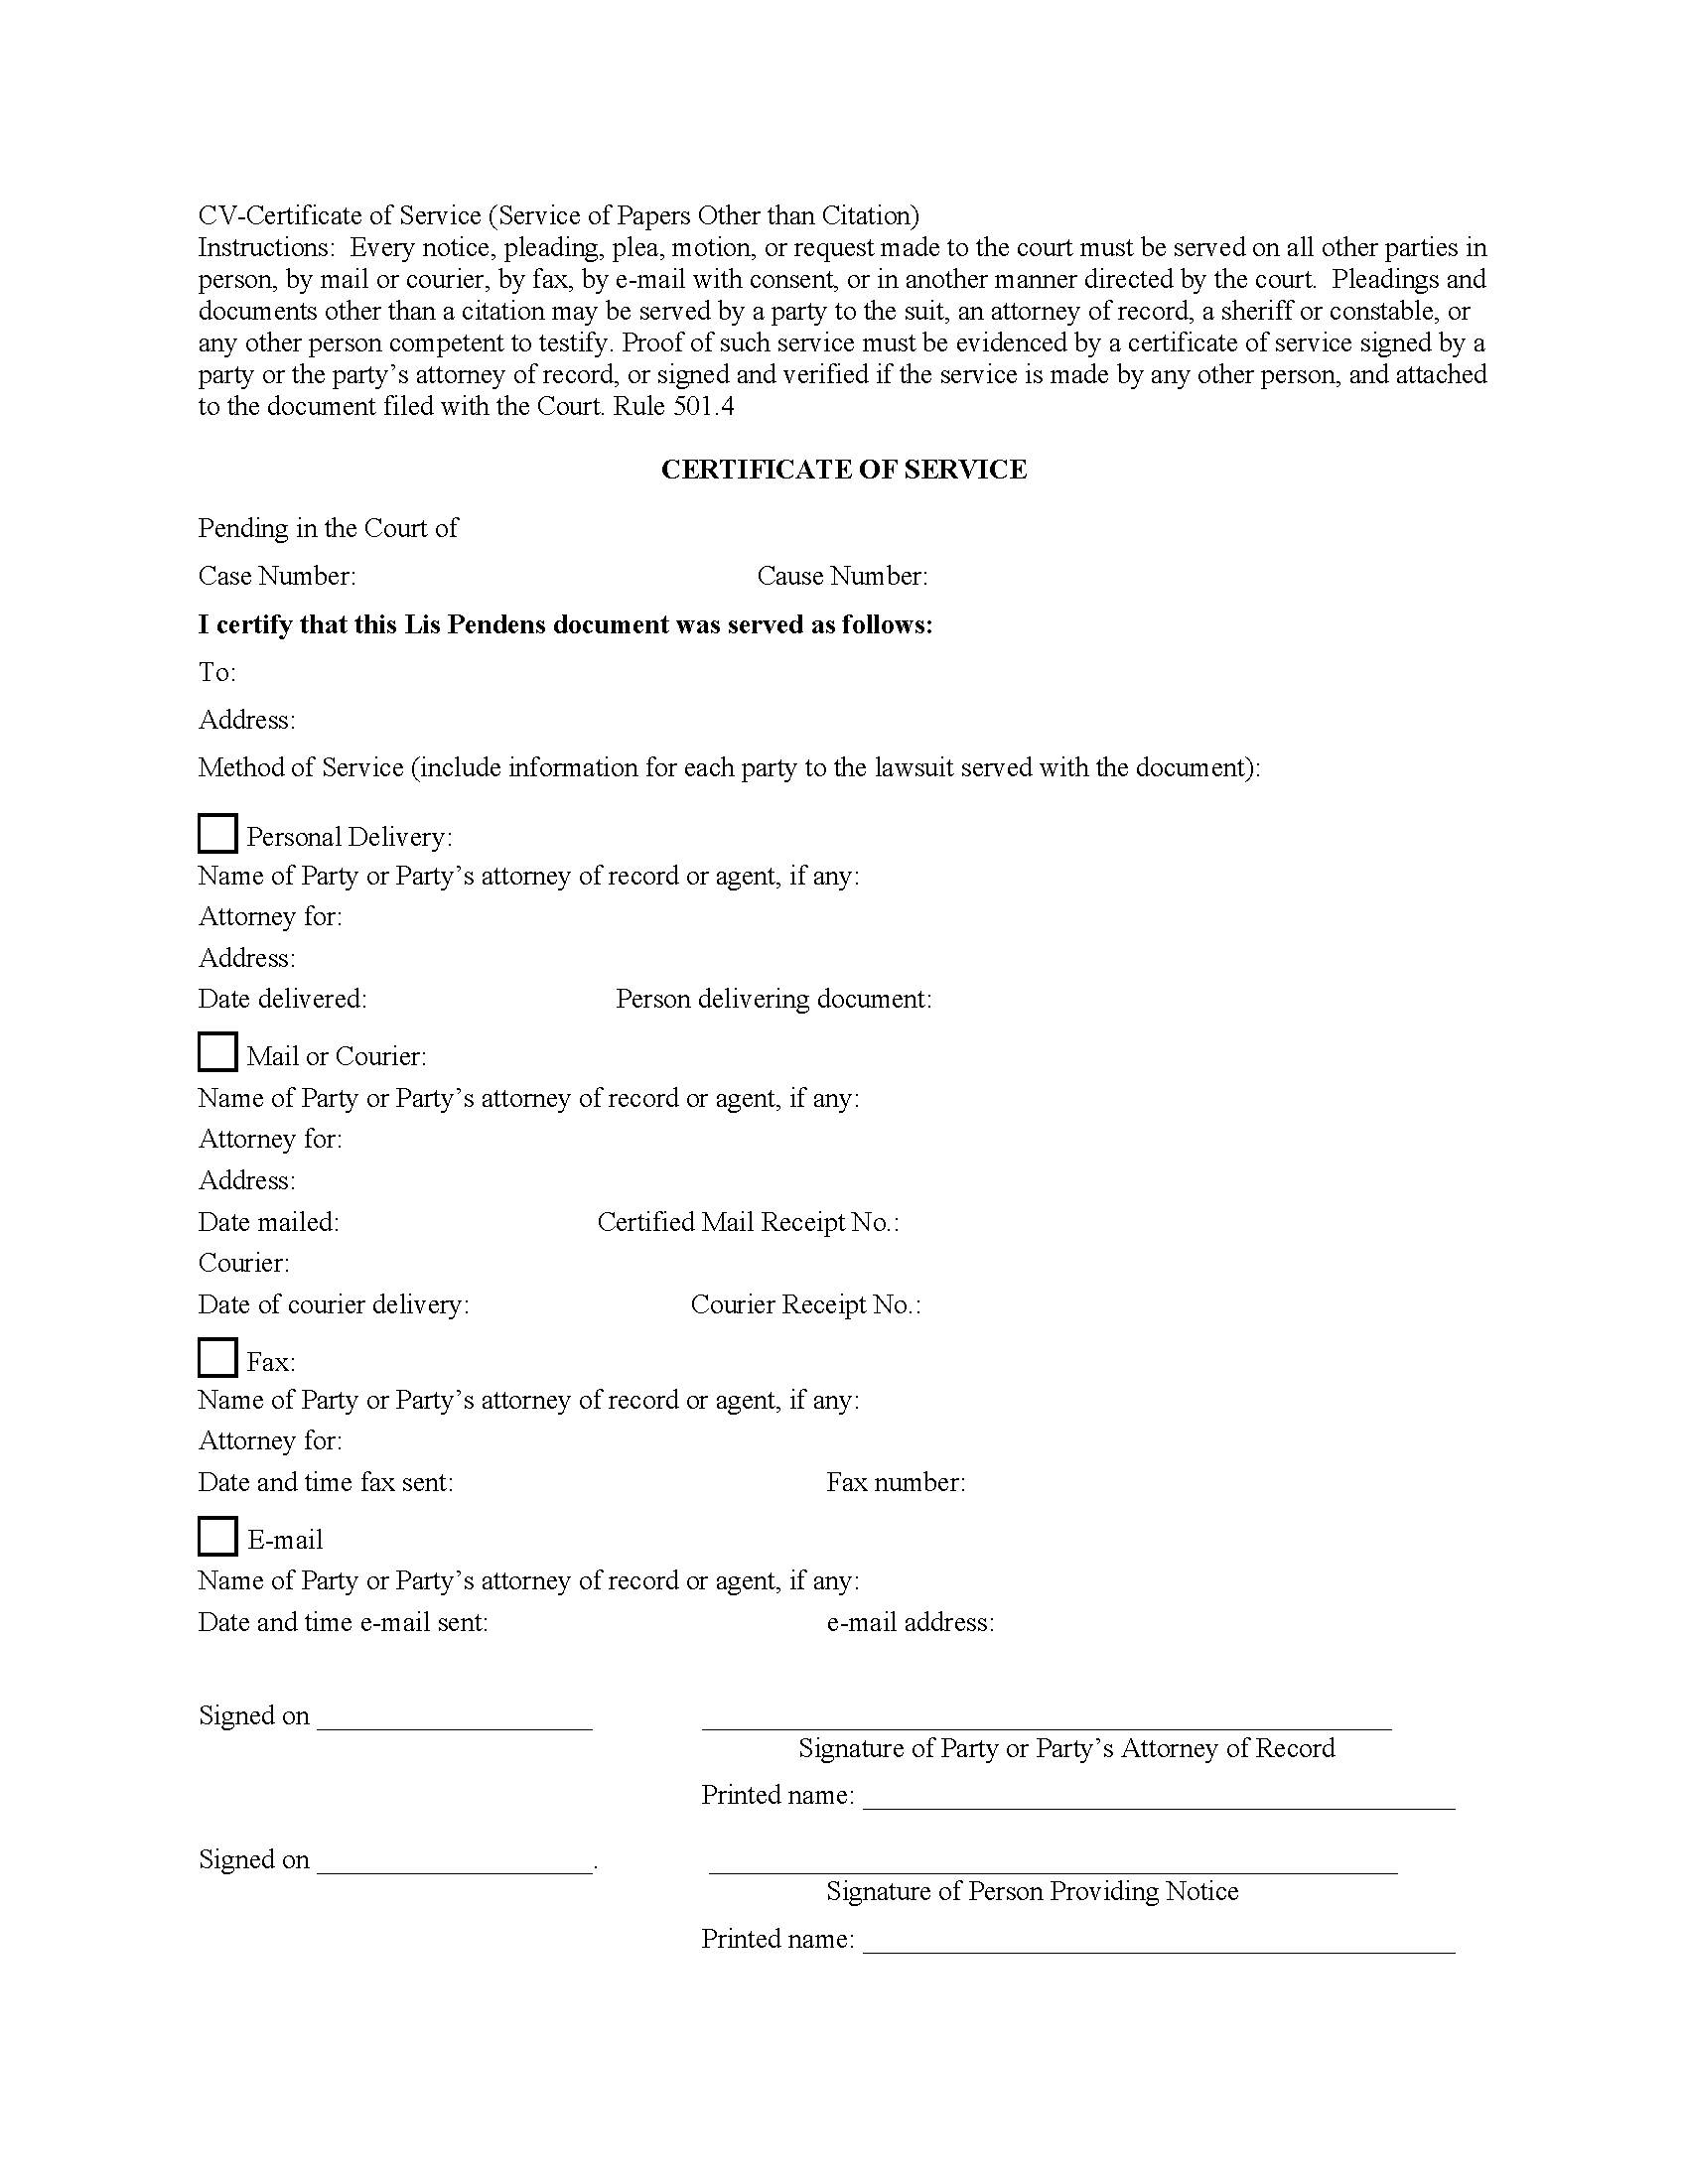 Certificate of Service Form